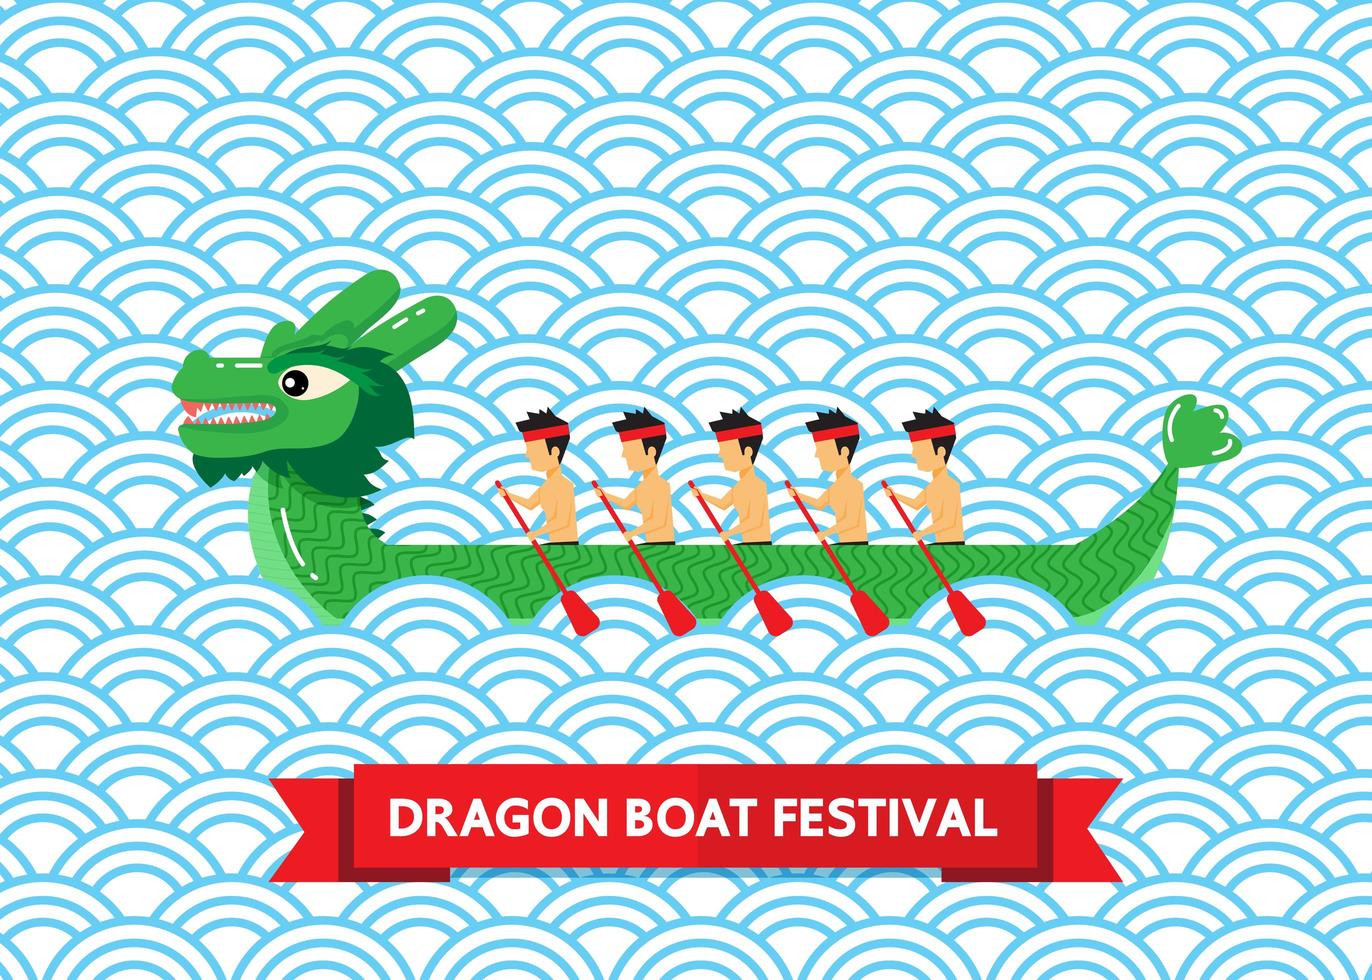 Green dragon boat on blue abstract background vector